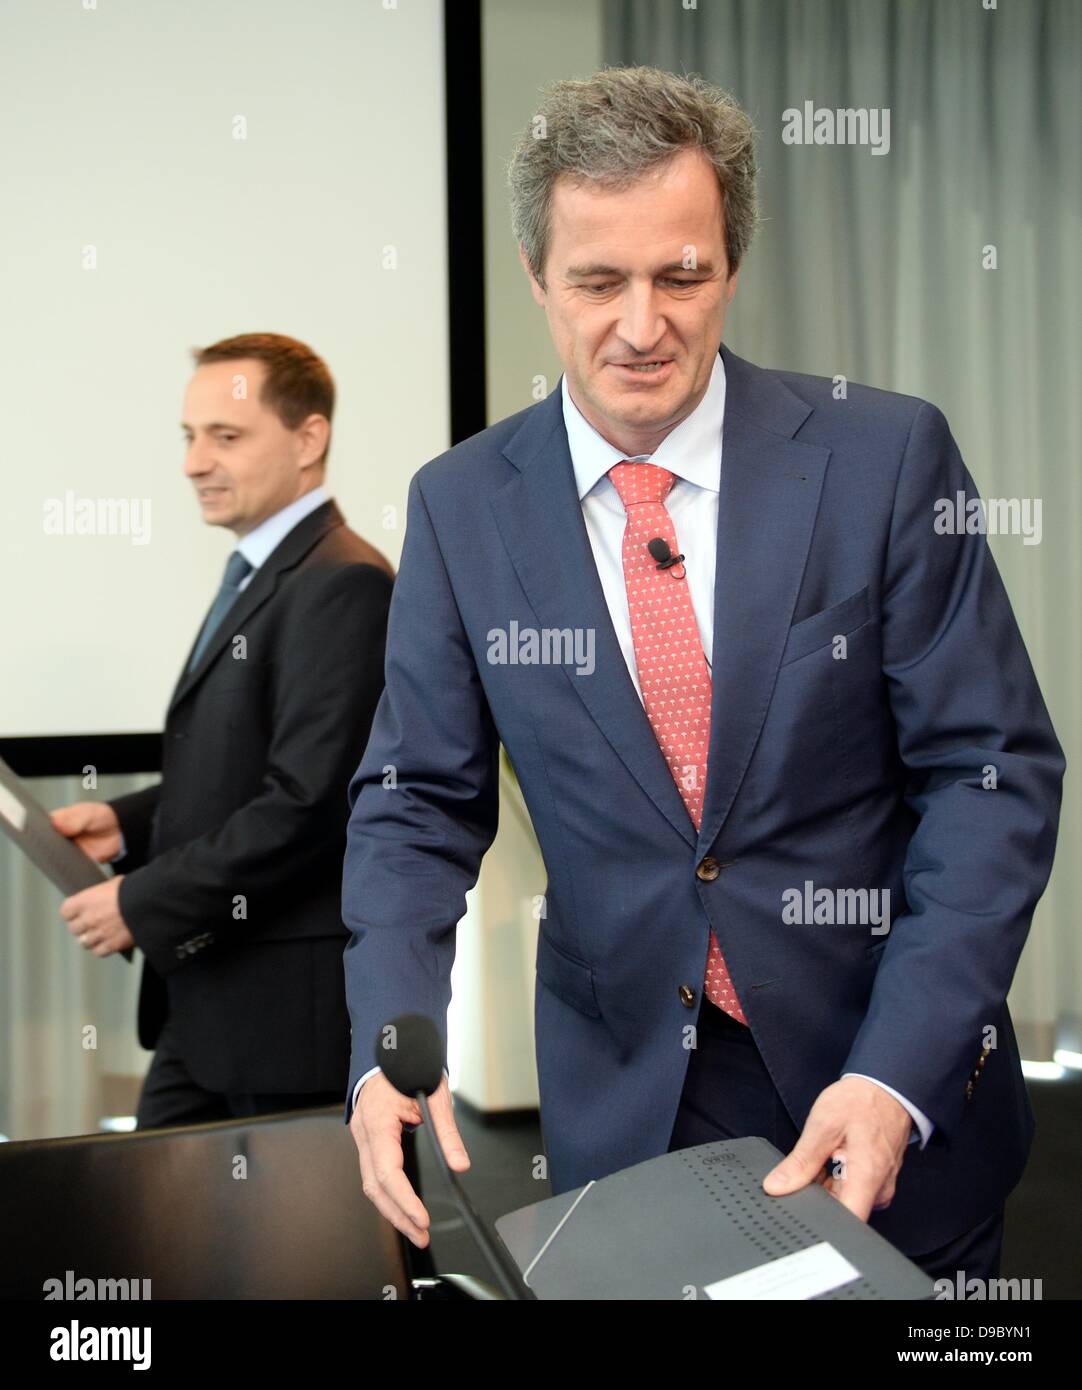 CEO of electric utilities company EnBW, Frank Mastiaux, and CFO Thomas Kusterer (L) enter the conference room before a press conference on Mastiaux's strategy for the future of the company in Stuttgart, Germany, 17 June 2013. Germany's third largest energy company intends to newly align itself. The energy turn and the phasing out of nuclear energy present great challenges to the company. The new CEO Frank Mastieux has to cut costs and to invest at the same time. Photo: BERND WEISSBROD Stock Photo